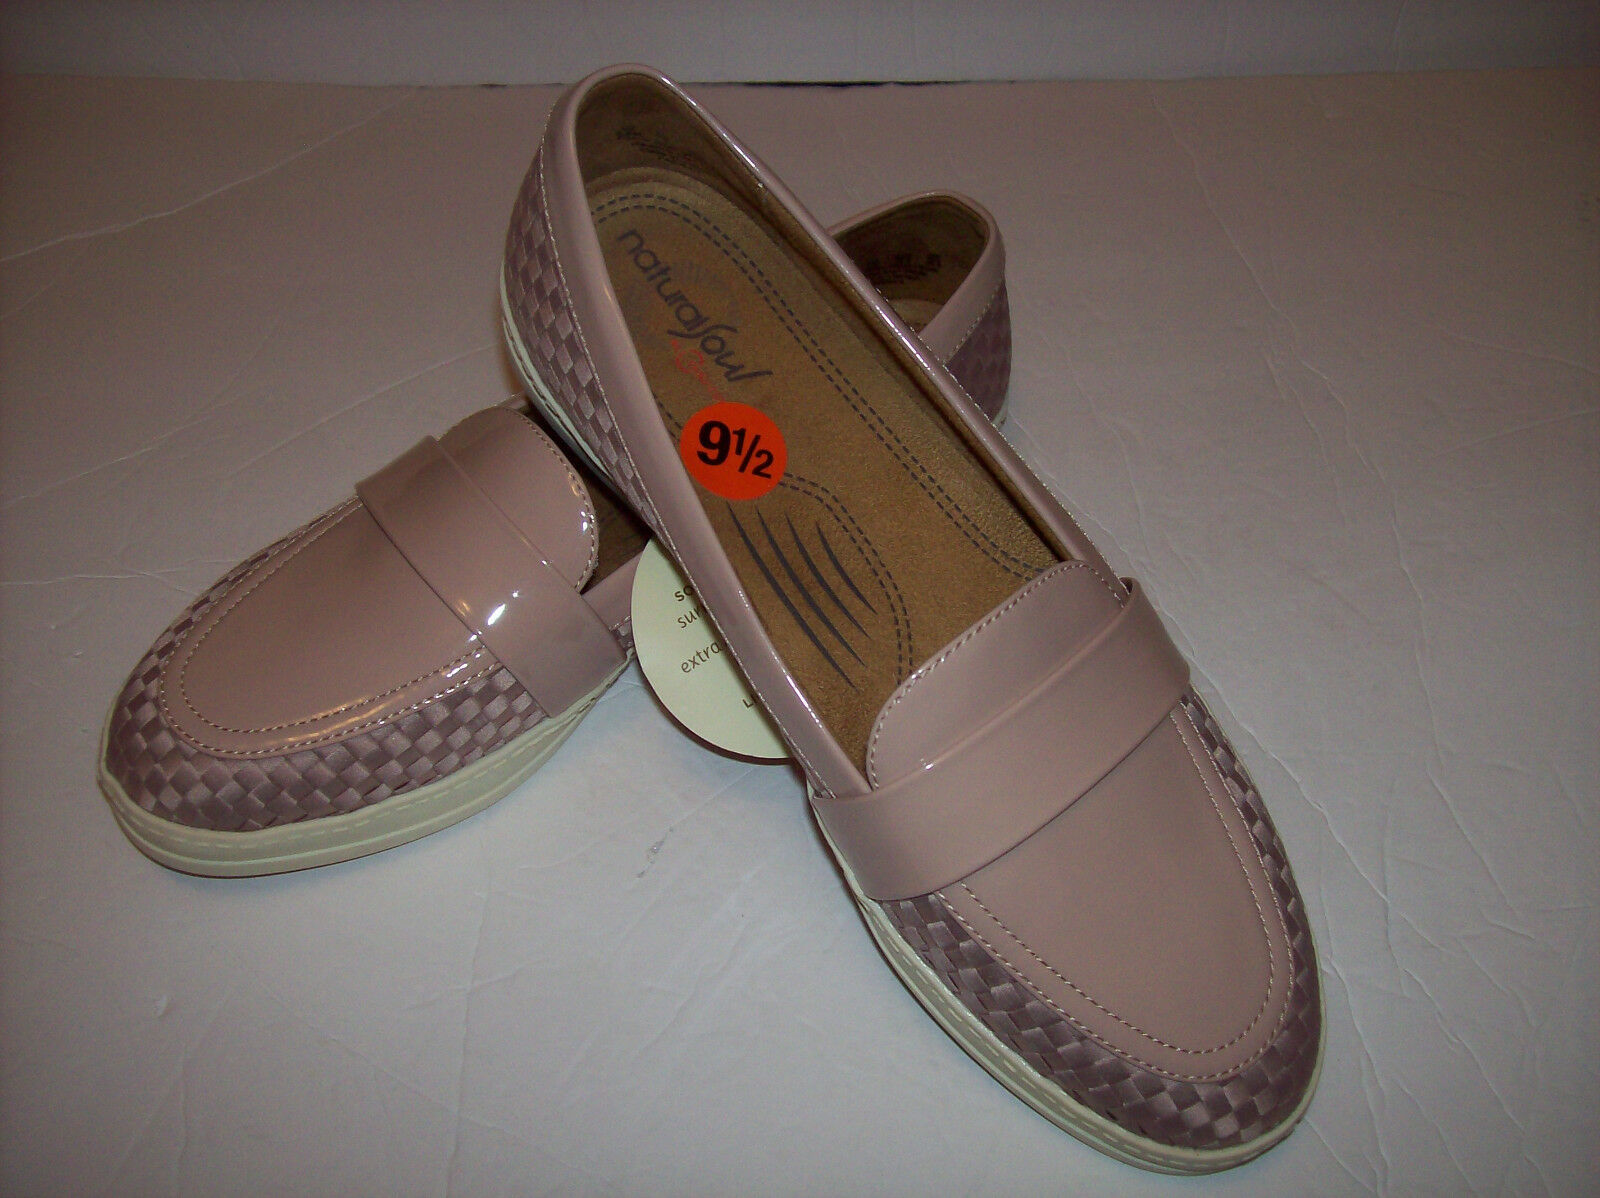 New NATURAL SOUL Nude beige flat comfort loafer shoes US Sz 9.5M. CLEARANCE